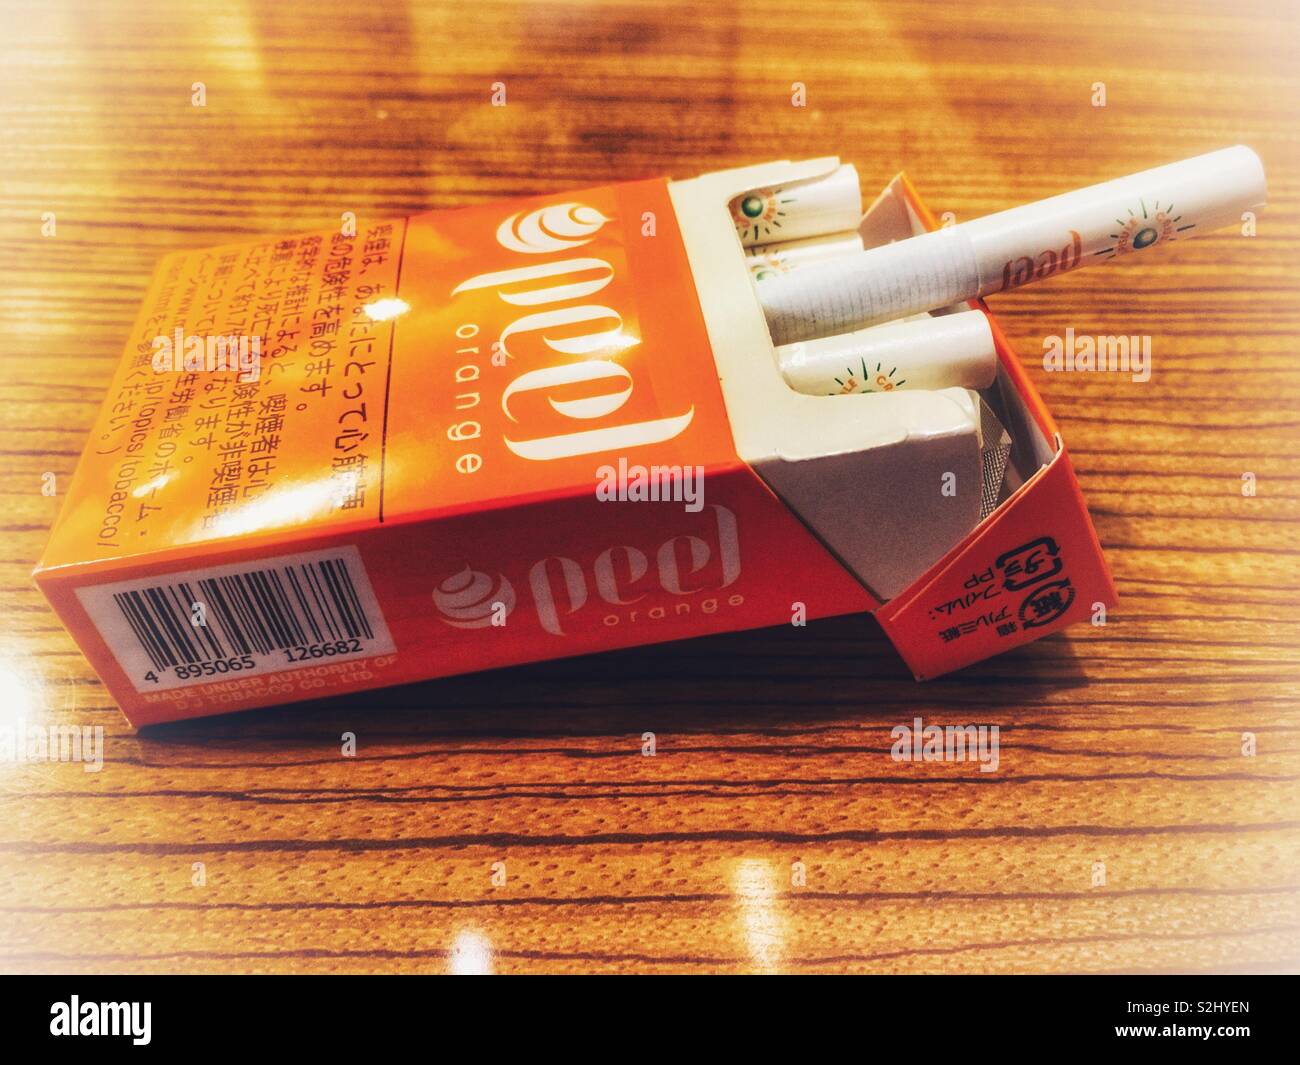 A pack of Japanese Peel Orange cigarettes on a table Stock Photo